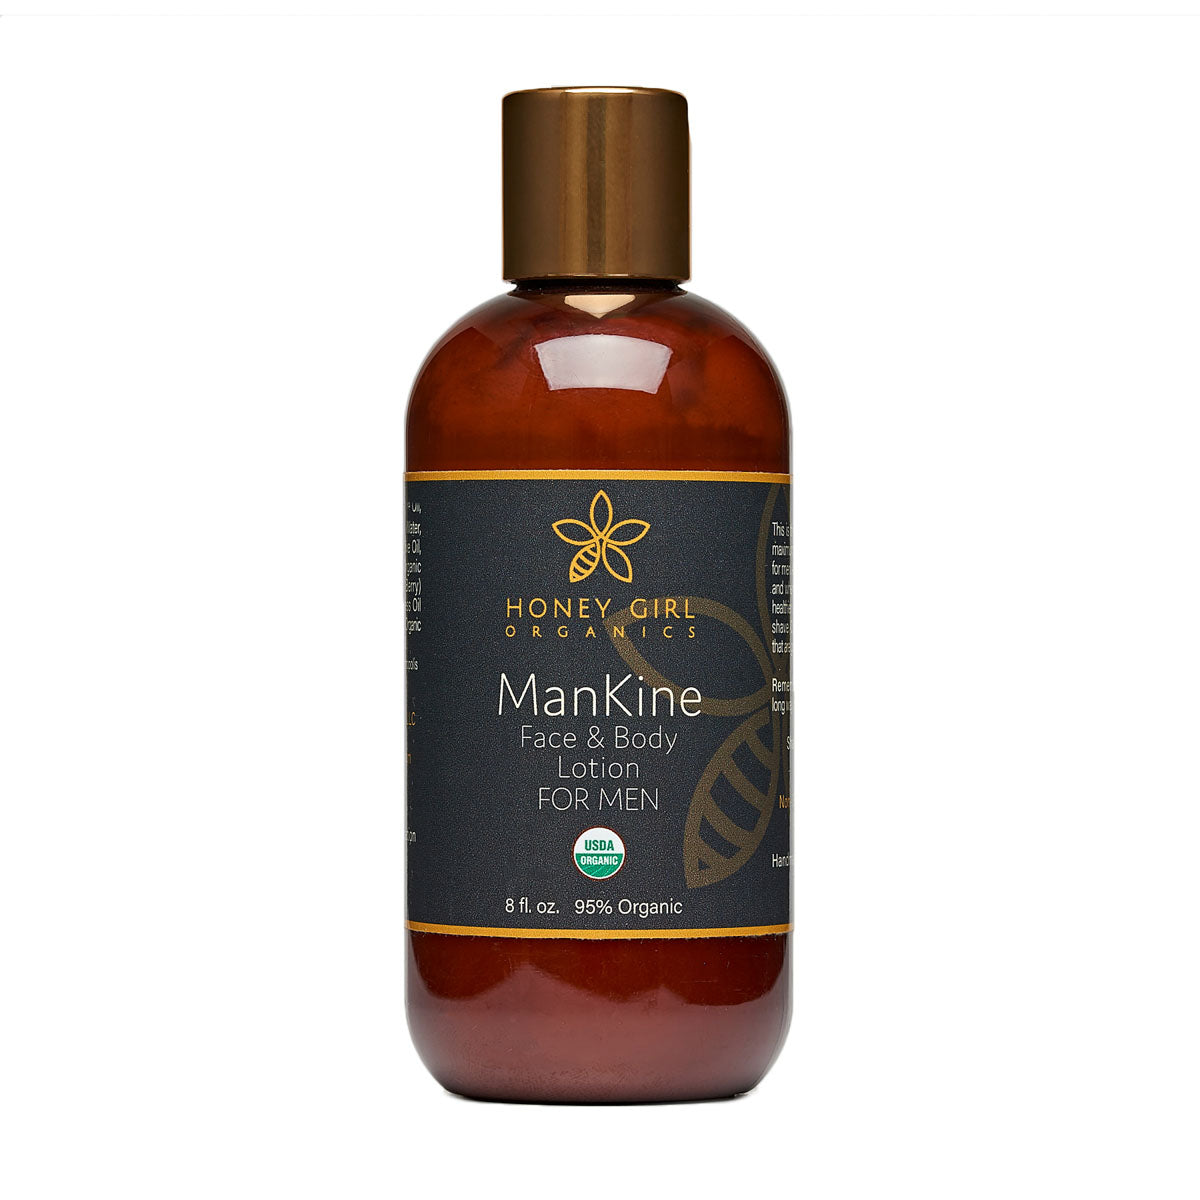 Mankine | Honey Girl Organics | Raw Living UK | Skin Care | Beauty | Honey Girl Organics Mankine is known as the ‘Everything Lotion For Men’. This easily absorbed lotion is for use on the face &amp; body, particularly after shaving!